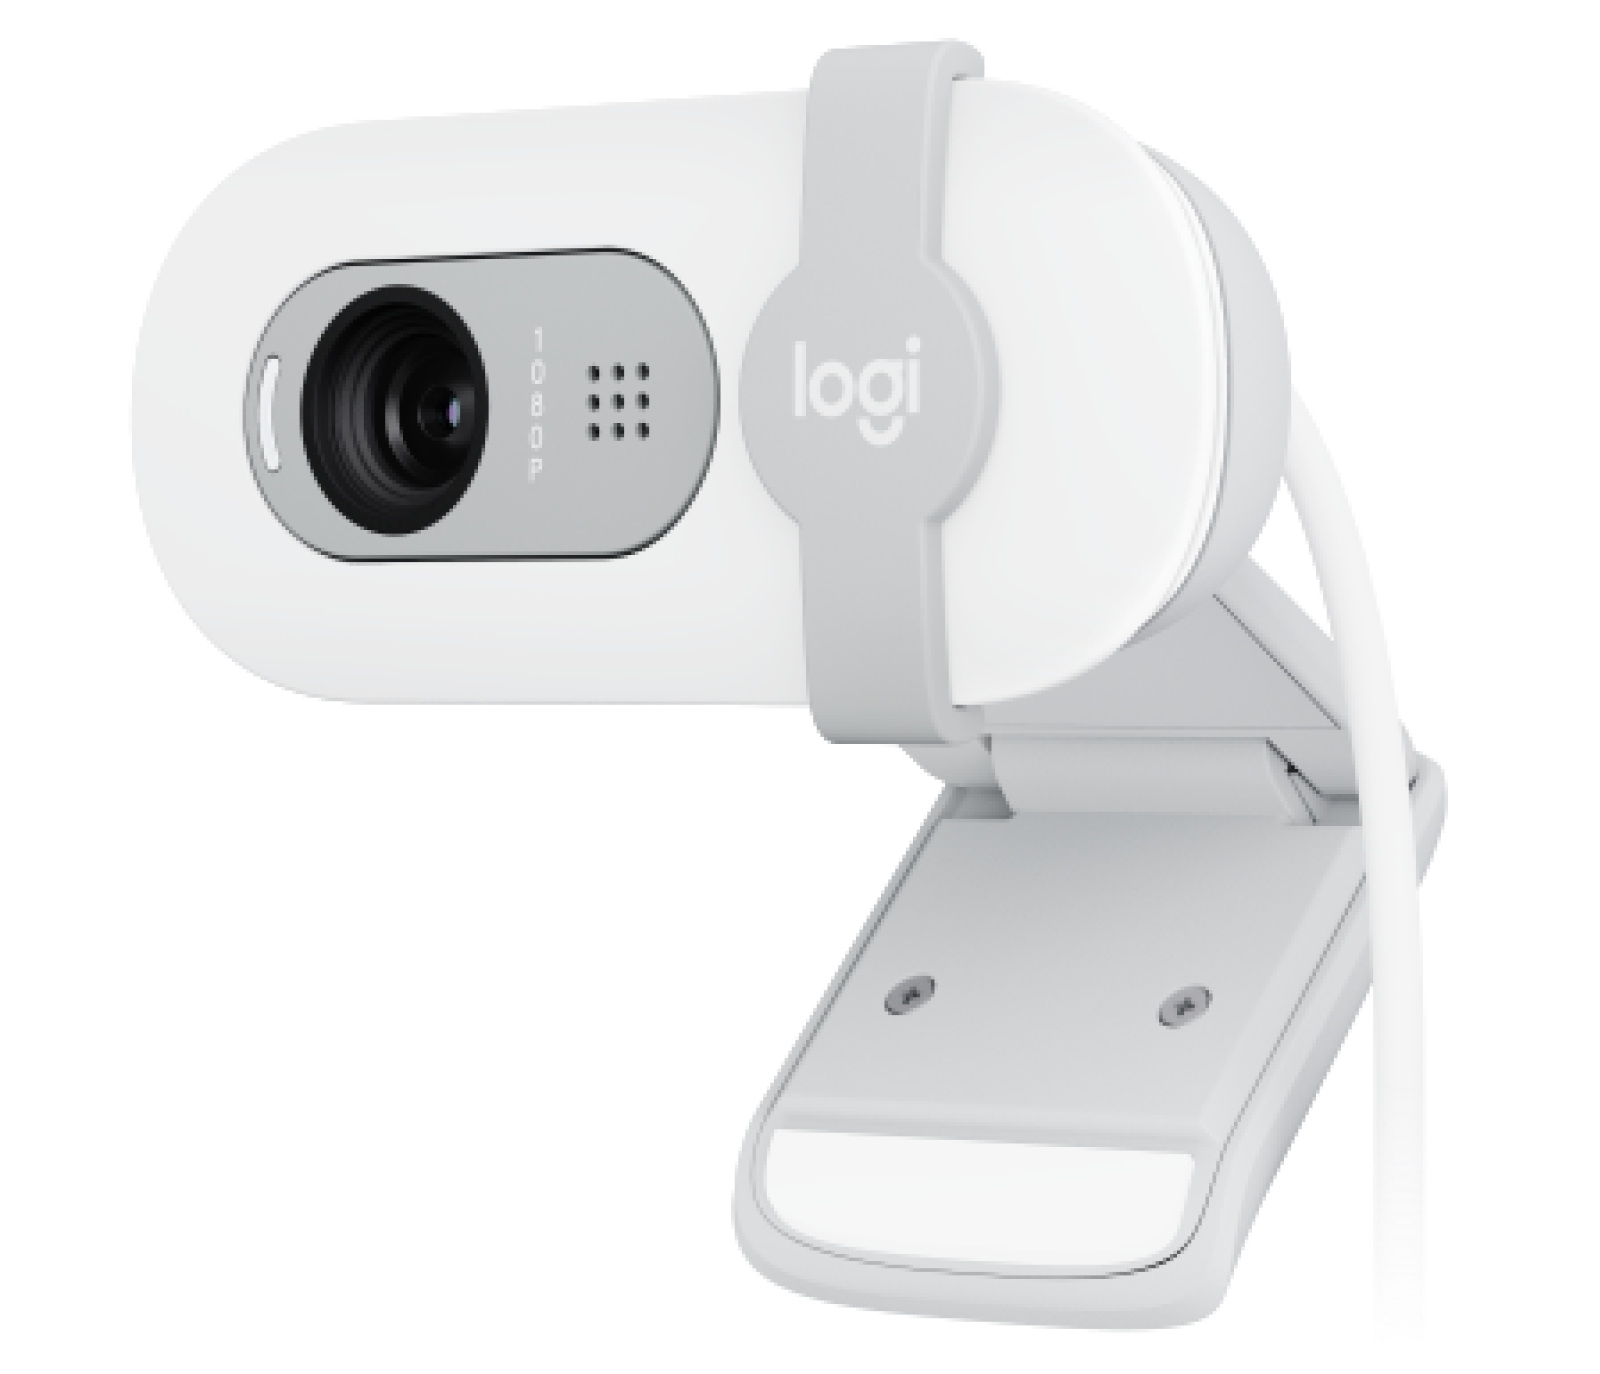 Logitech Brio 100 1080p Full HD Webcam for Meetings and Streaming Graphite  960-001580 - Best Buy